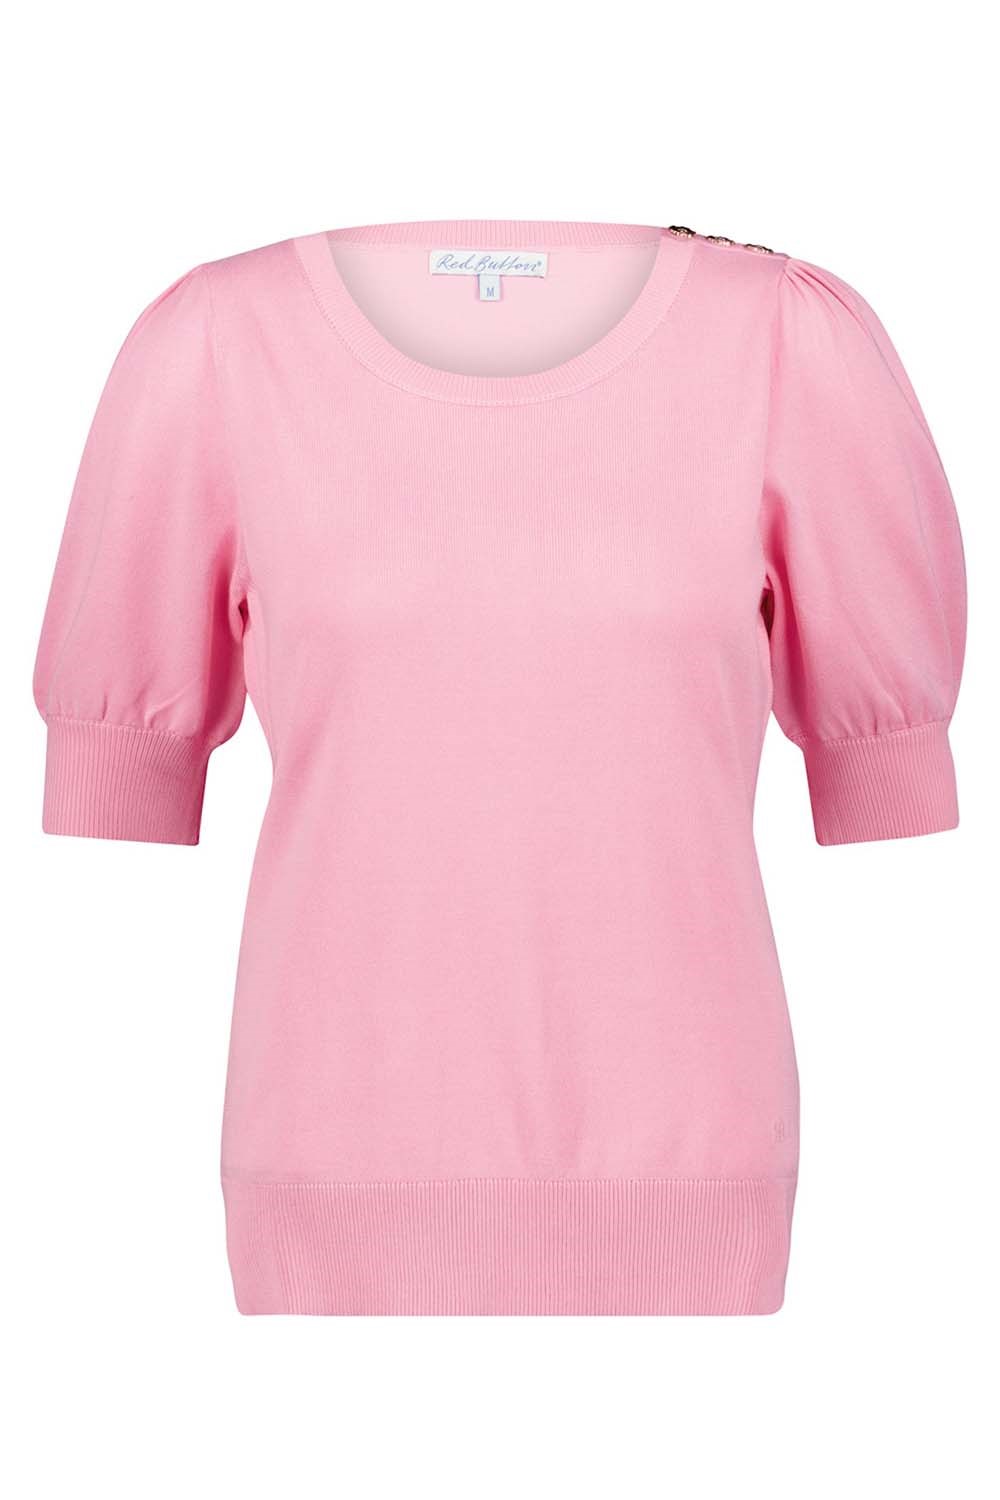 Sweet puff top Soft pink